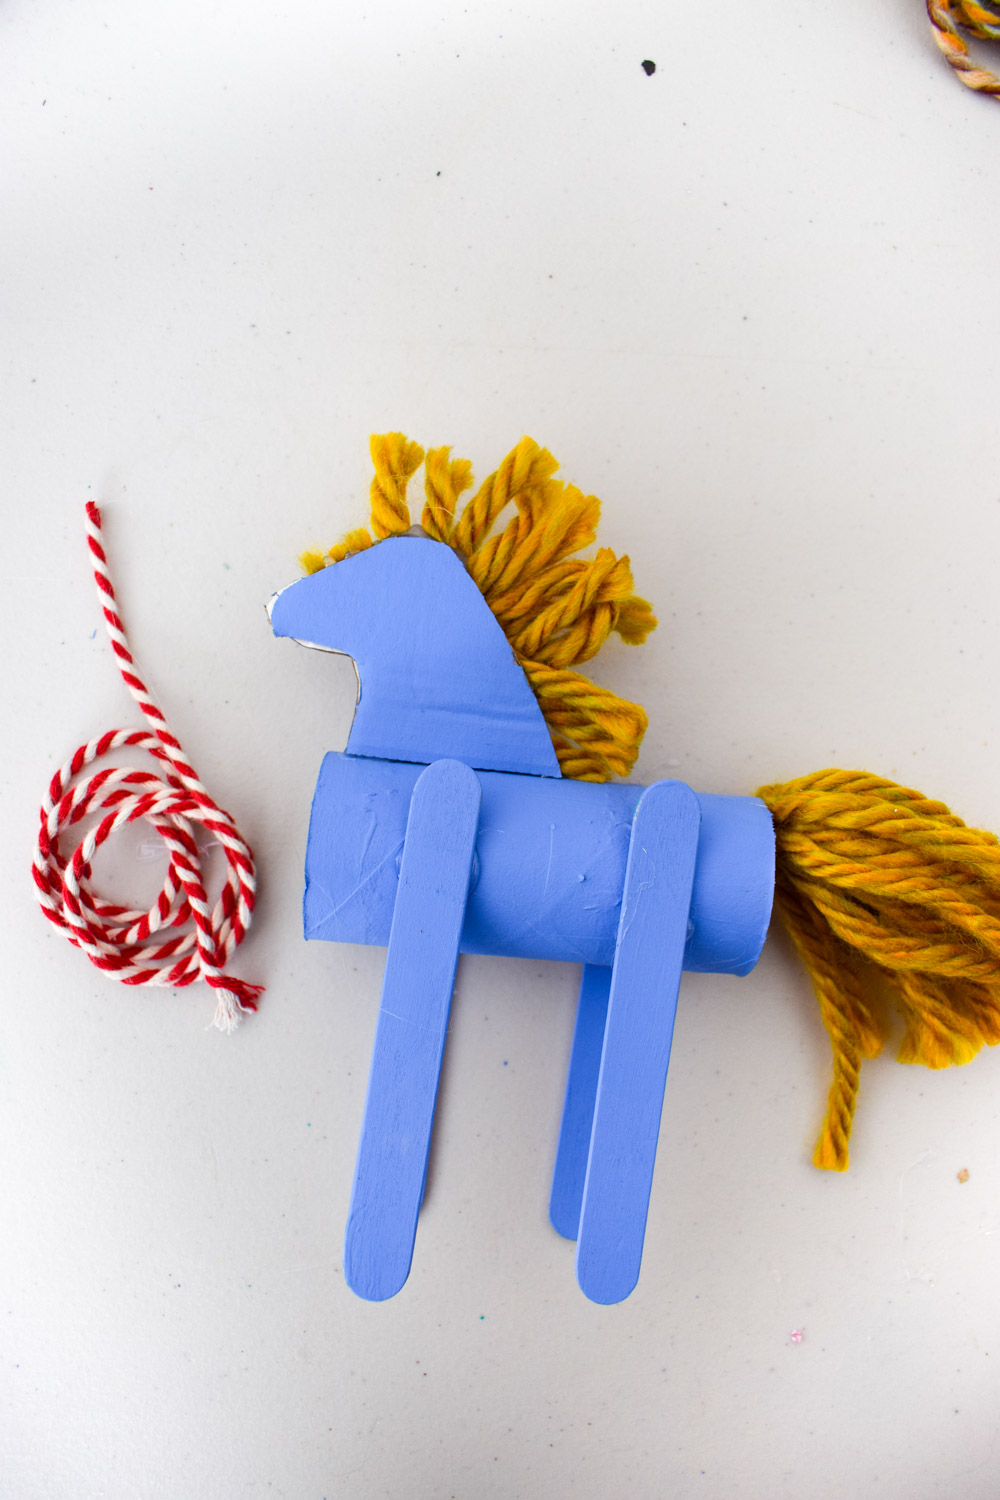 diy toilet paper roll horses are the perfect rainy day craft, and your little ones will get some mileage out of them. Come see how!